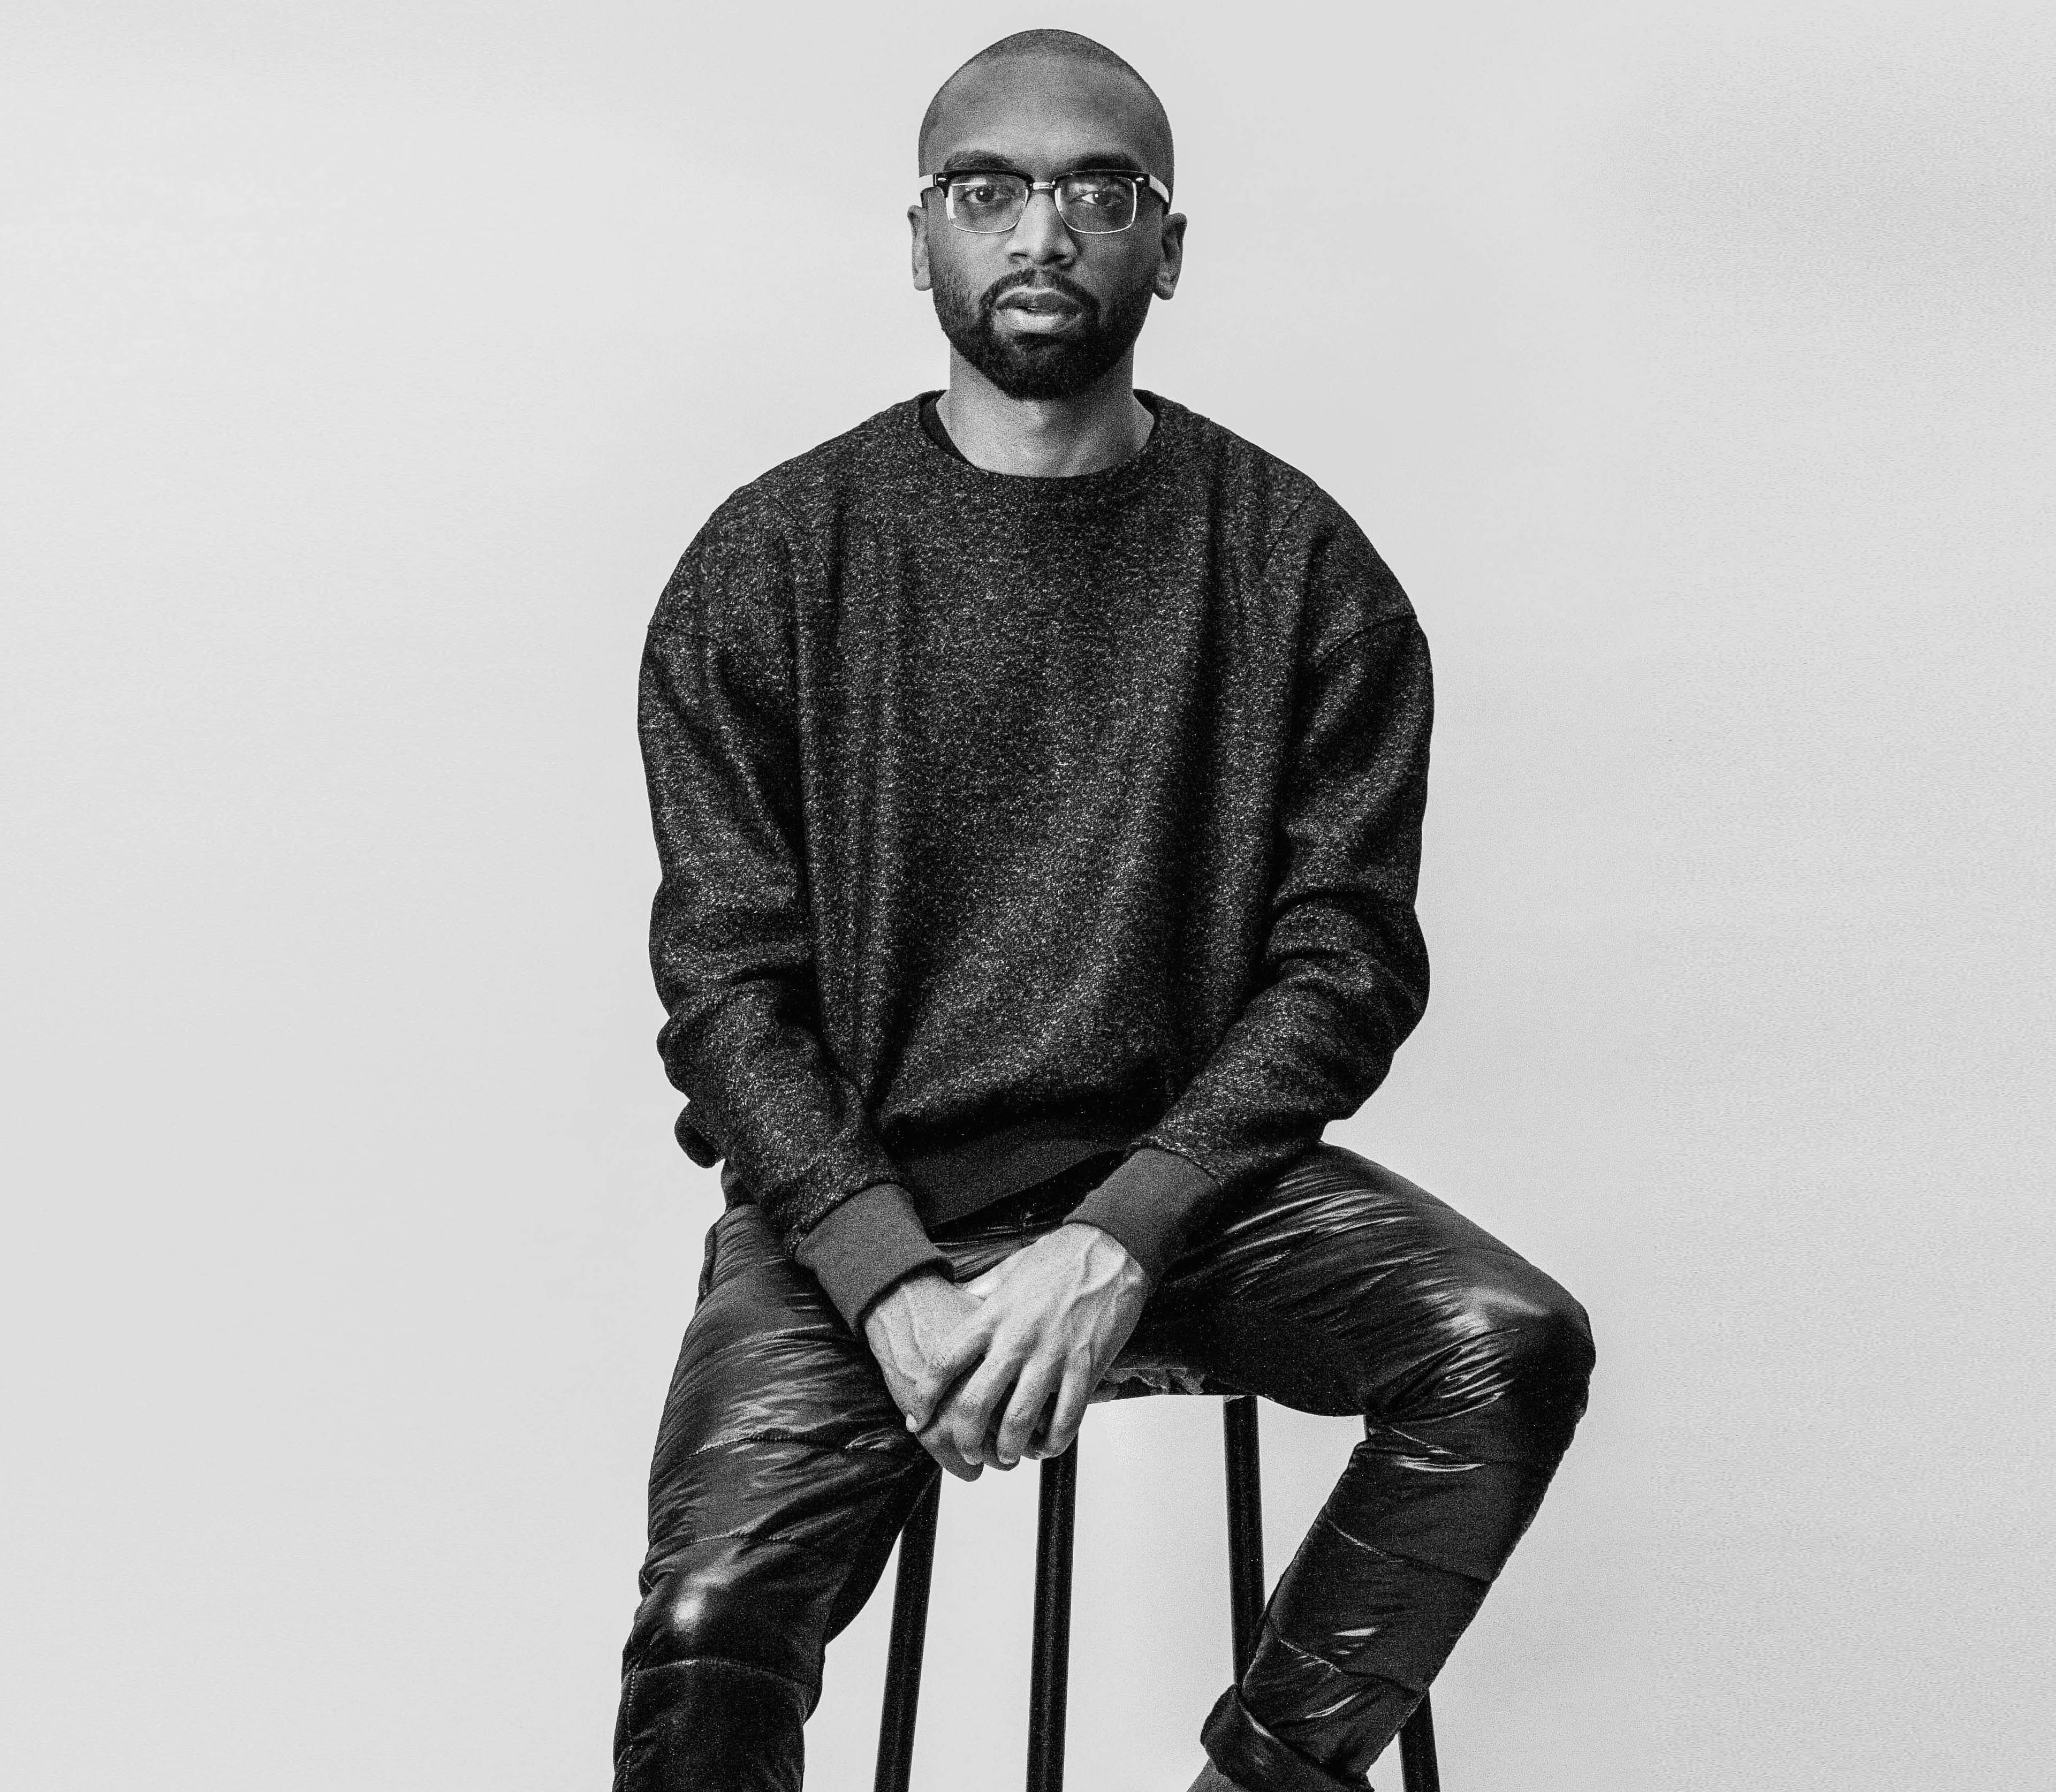 Pyer Moss Designer Kerby Jean-Raymond Coming to MCA Chicago